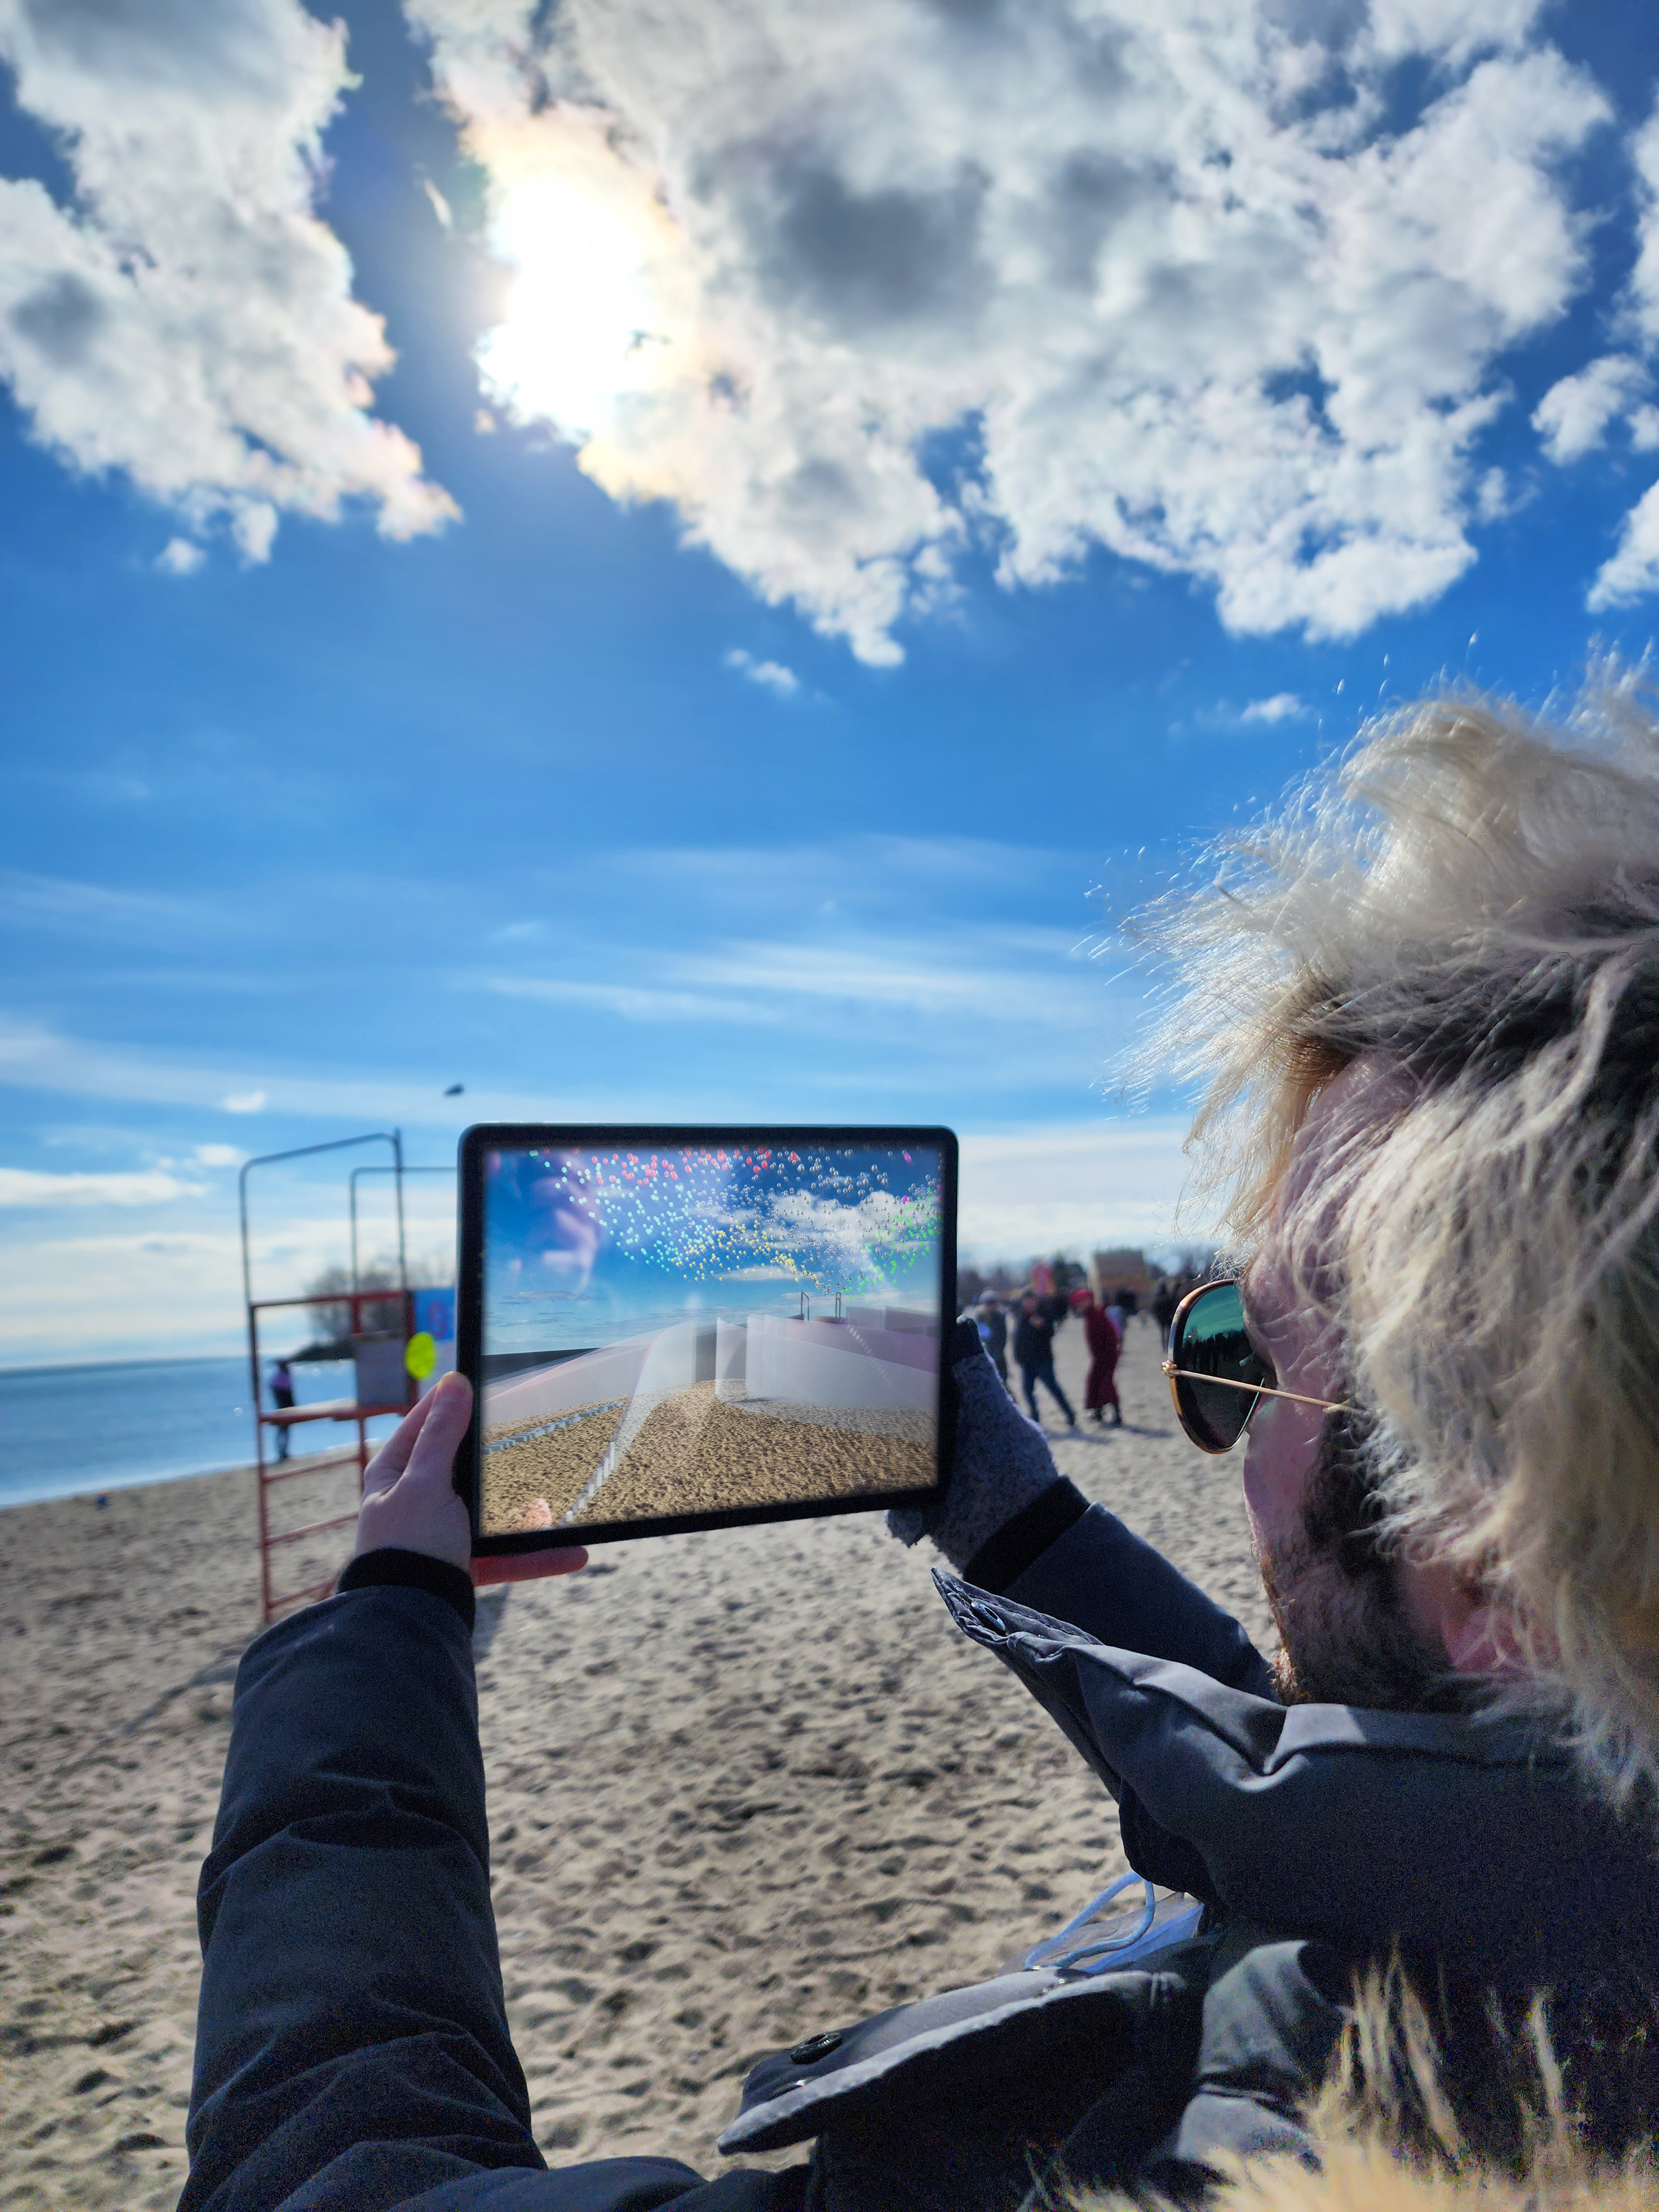 A person holding up a iPad on a beach with a big blue sky with white clouds. The scenery is reflected back at the person with the iPad.